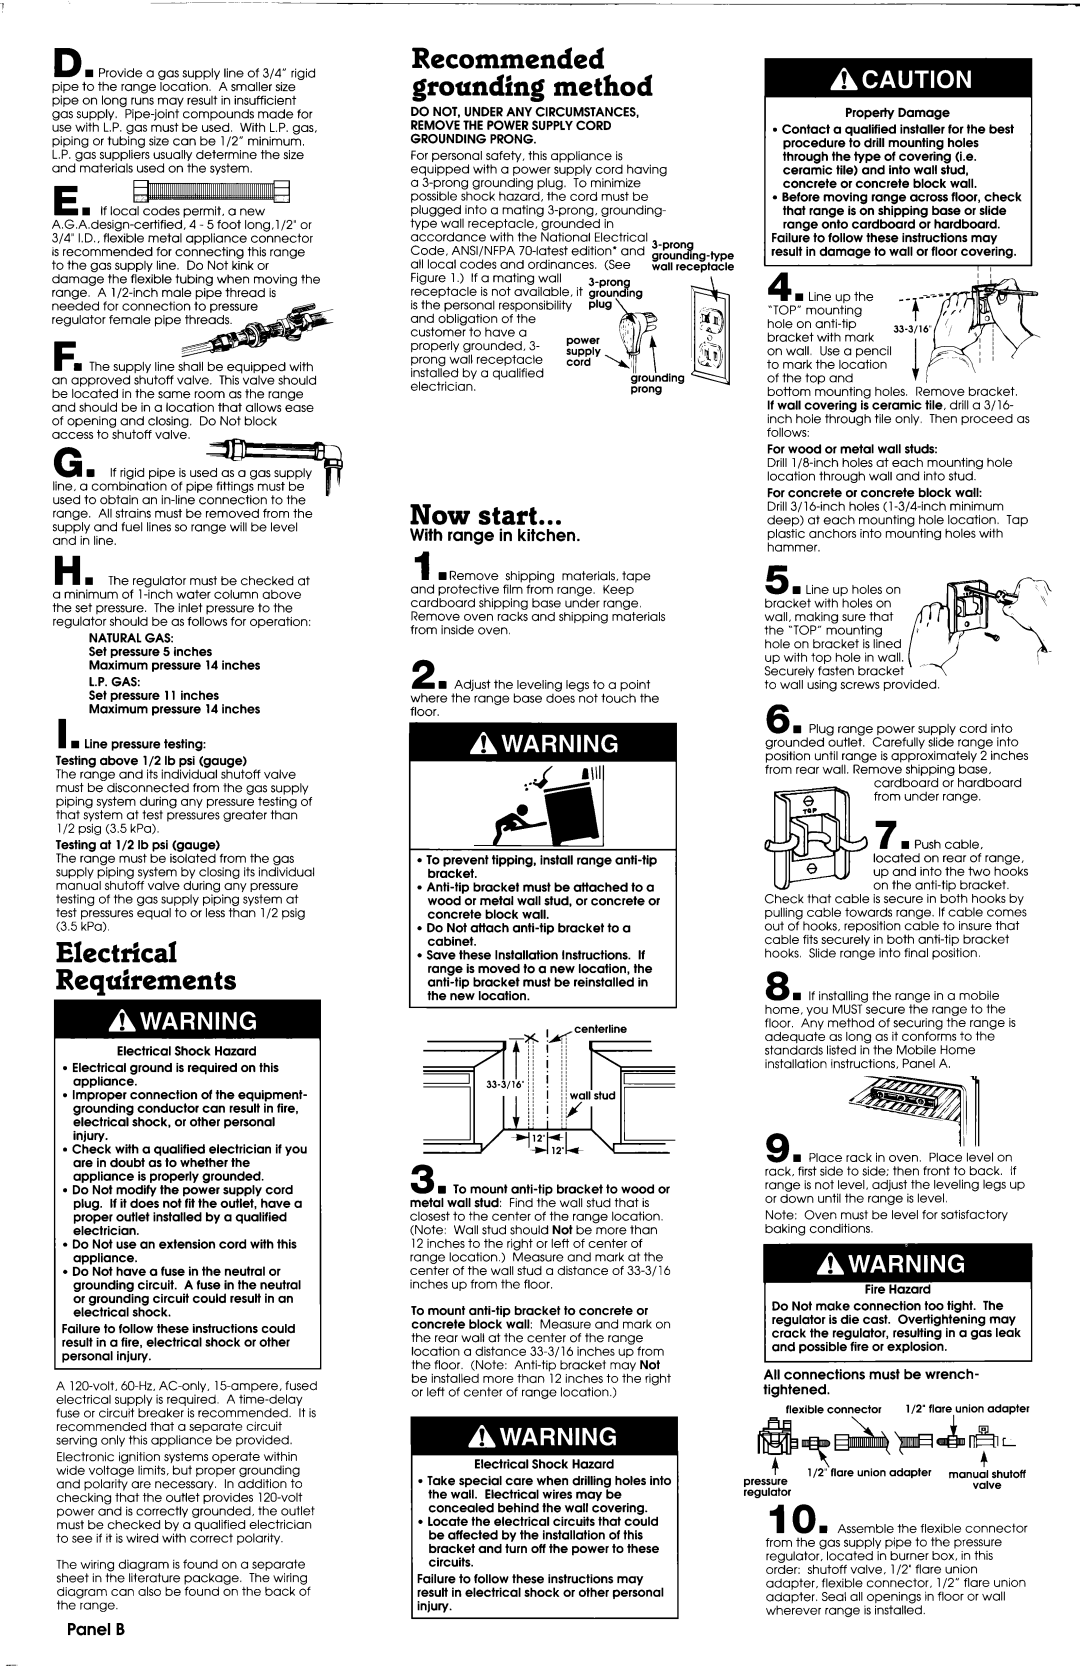 Whirlpool 30 installation instructions Electrical Requirements, Now start, Recommended grounding method 